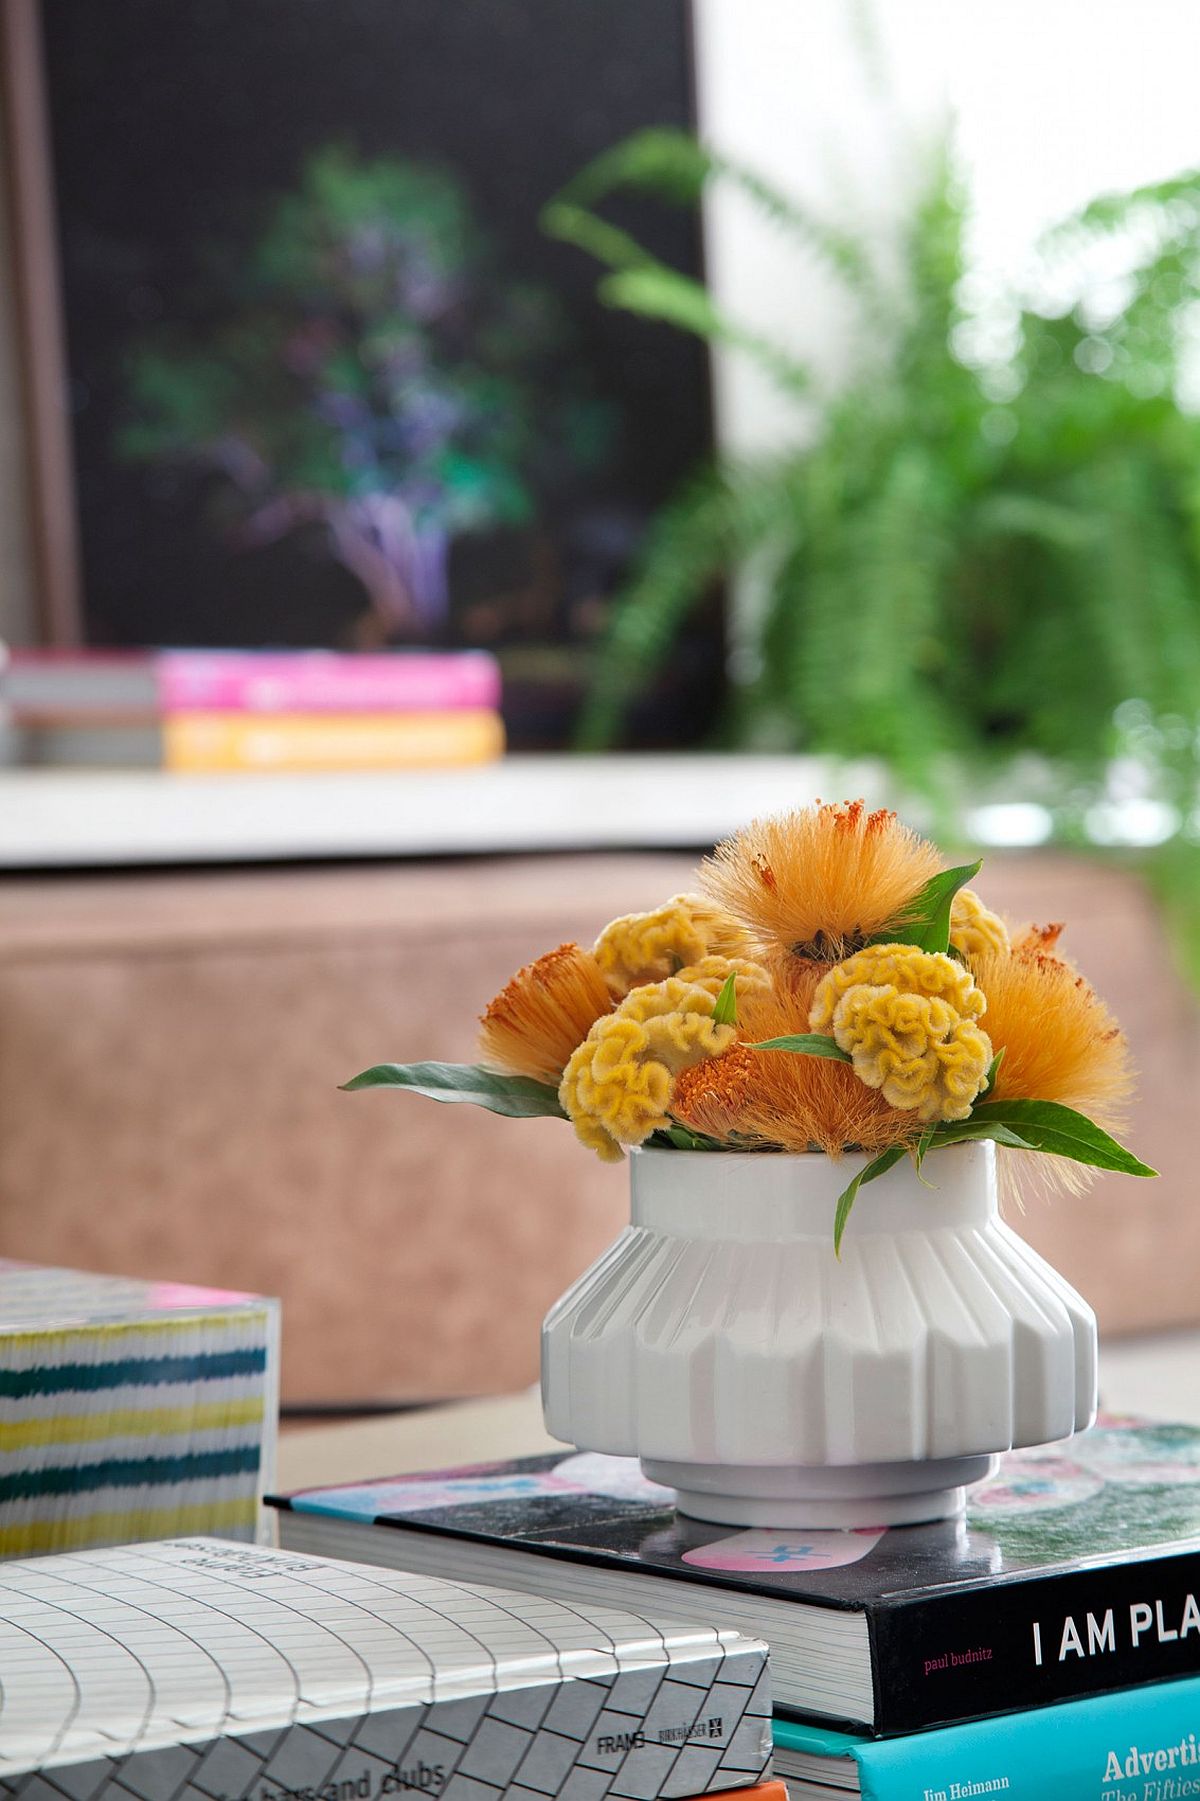 Colorful flowers add freshness and cheerful allure to the interior